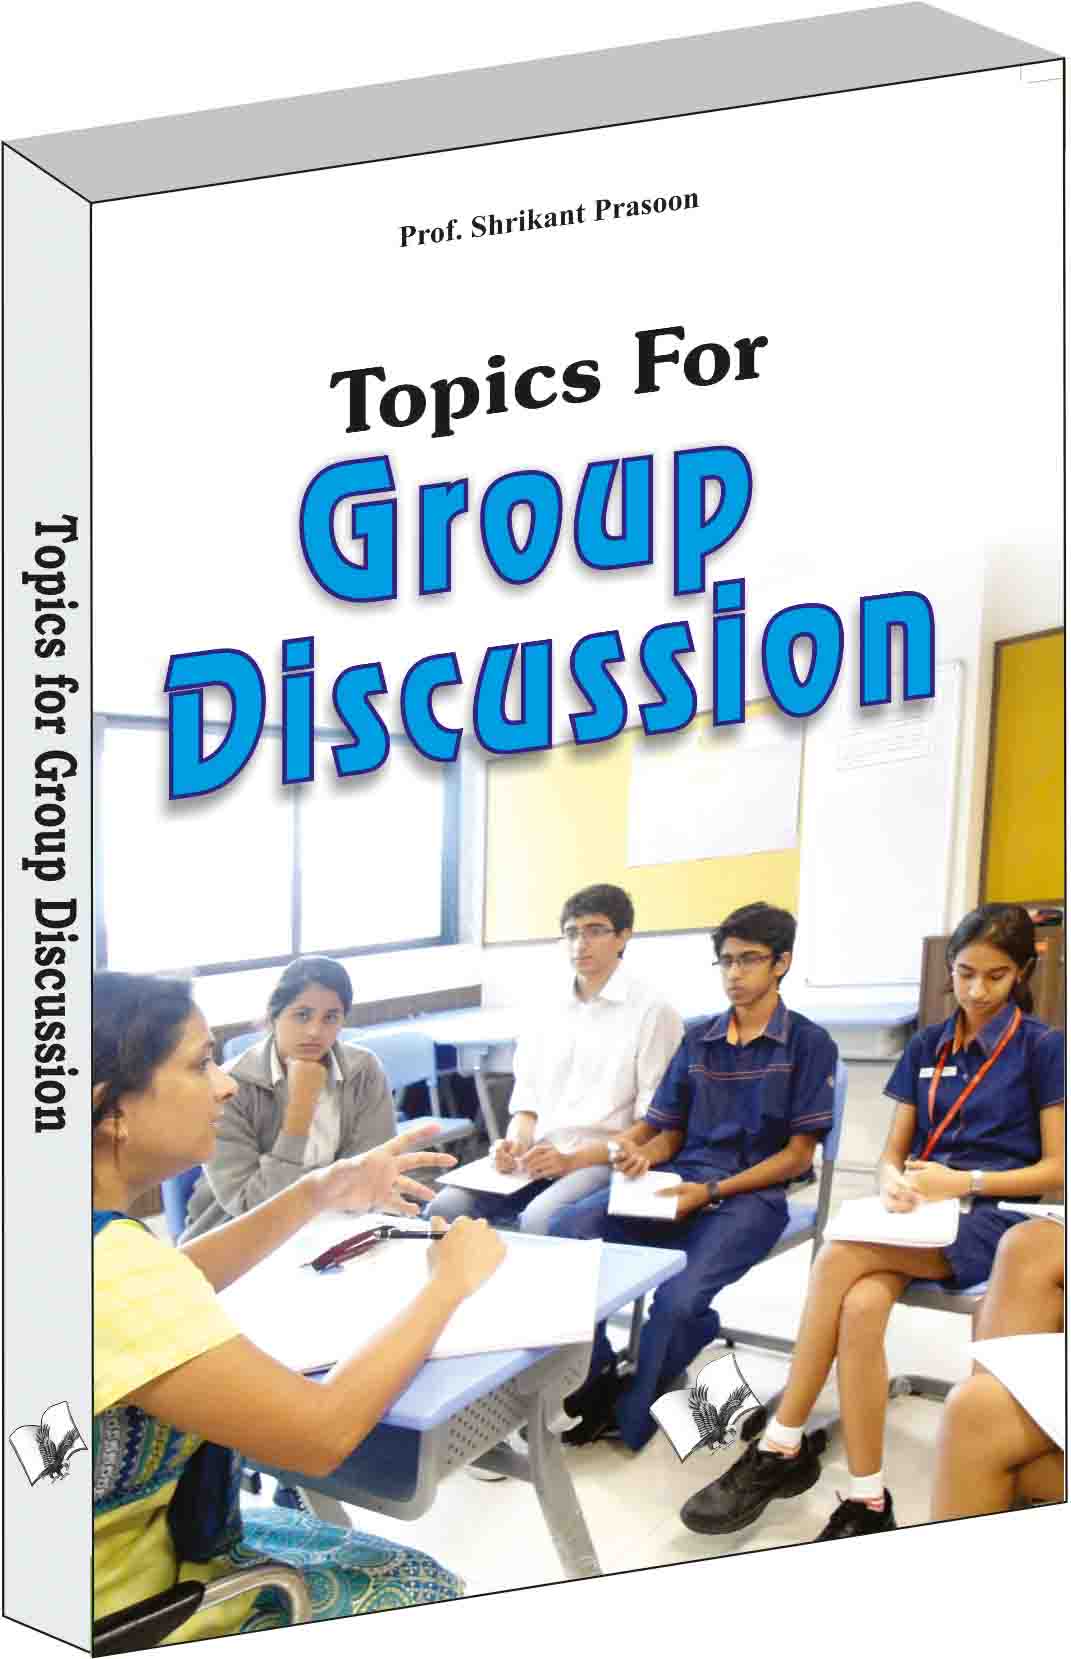 Topics for Group Discussion -Tips to remain the centre of discussion